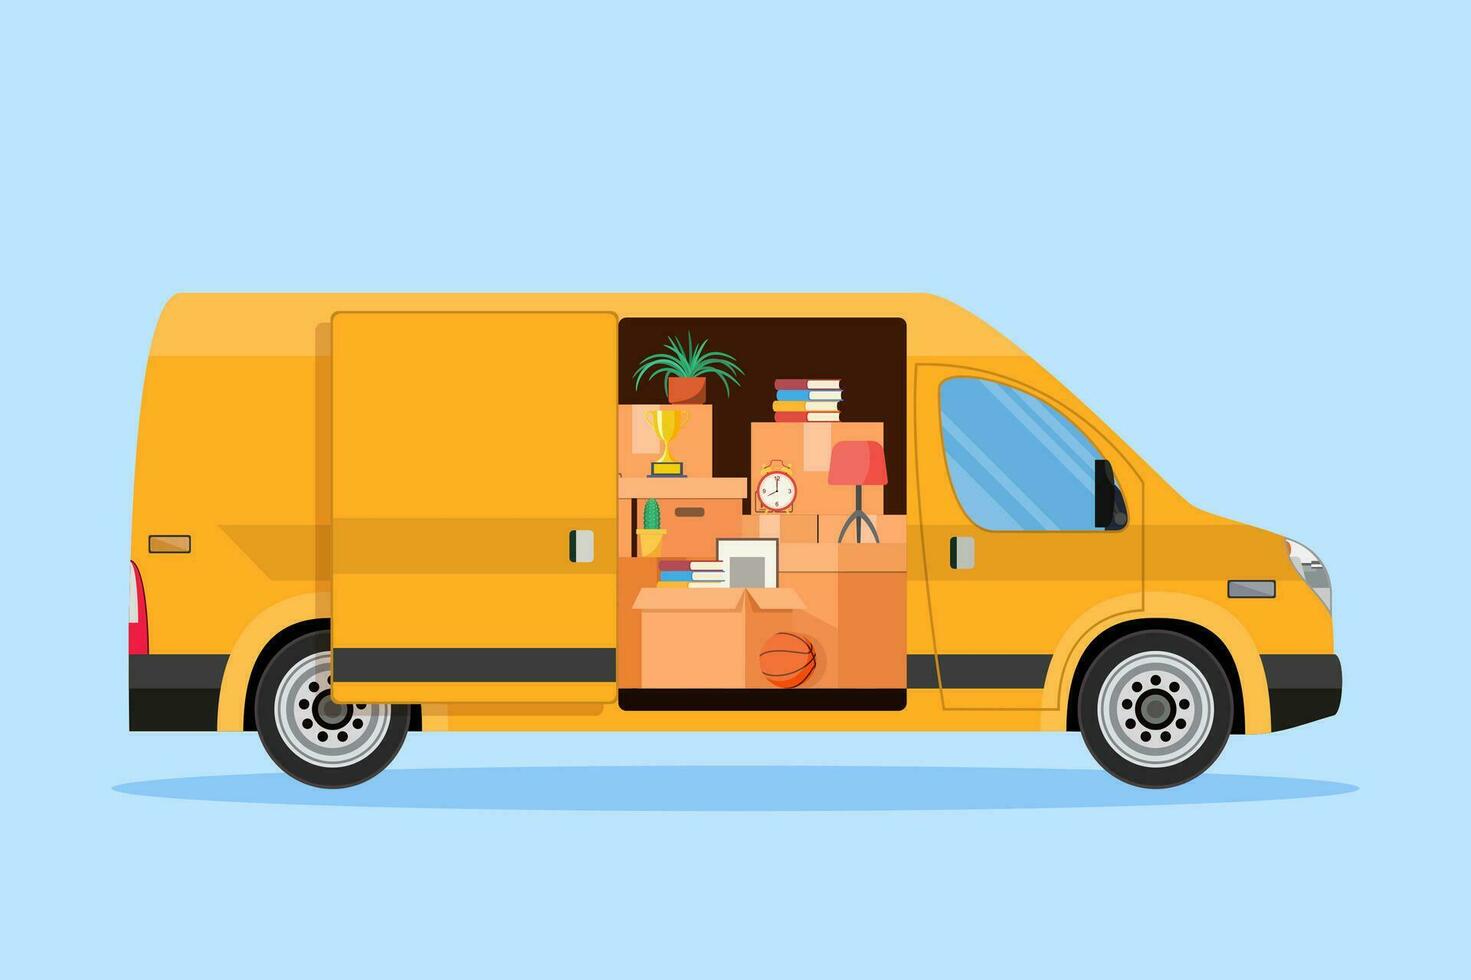 Delivery service concept. moving house. Open delivery van with furnitures and cardboard boxes. Family relocated to new home. Vector illustration in flat style